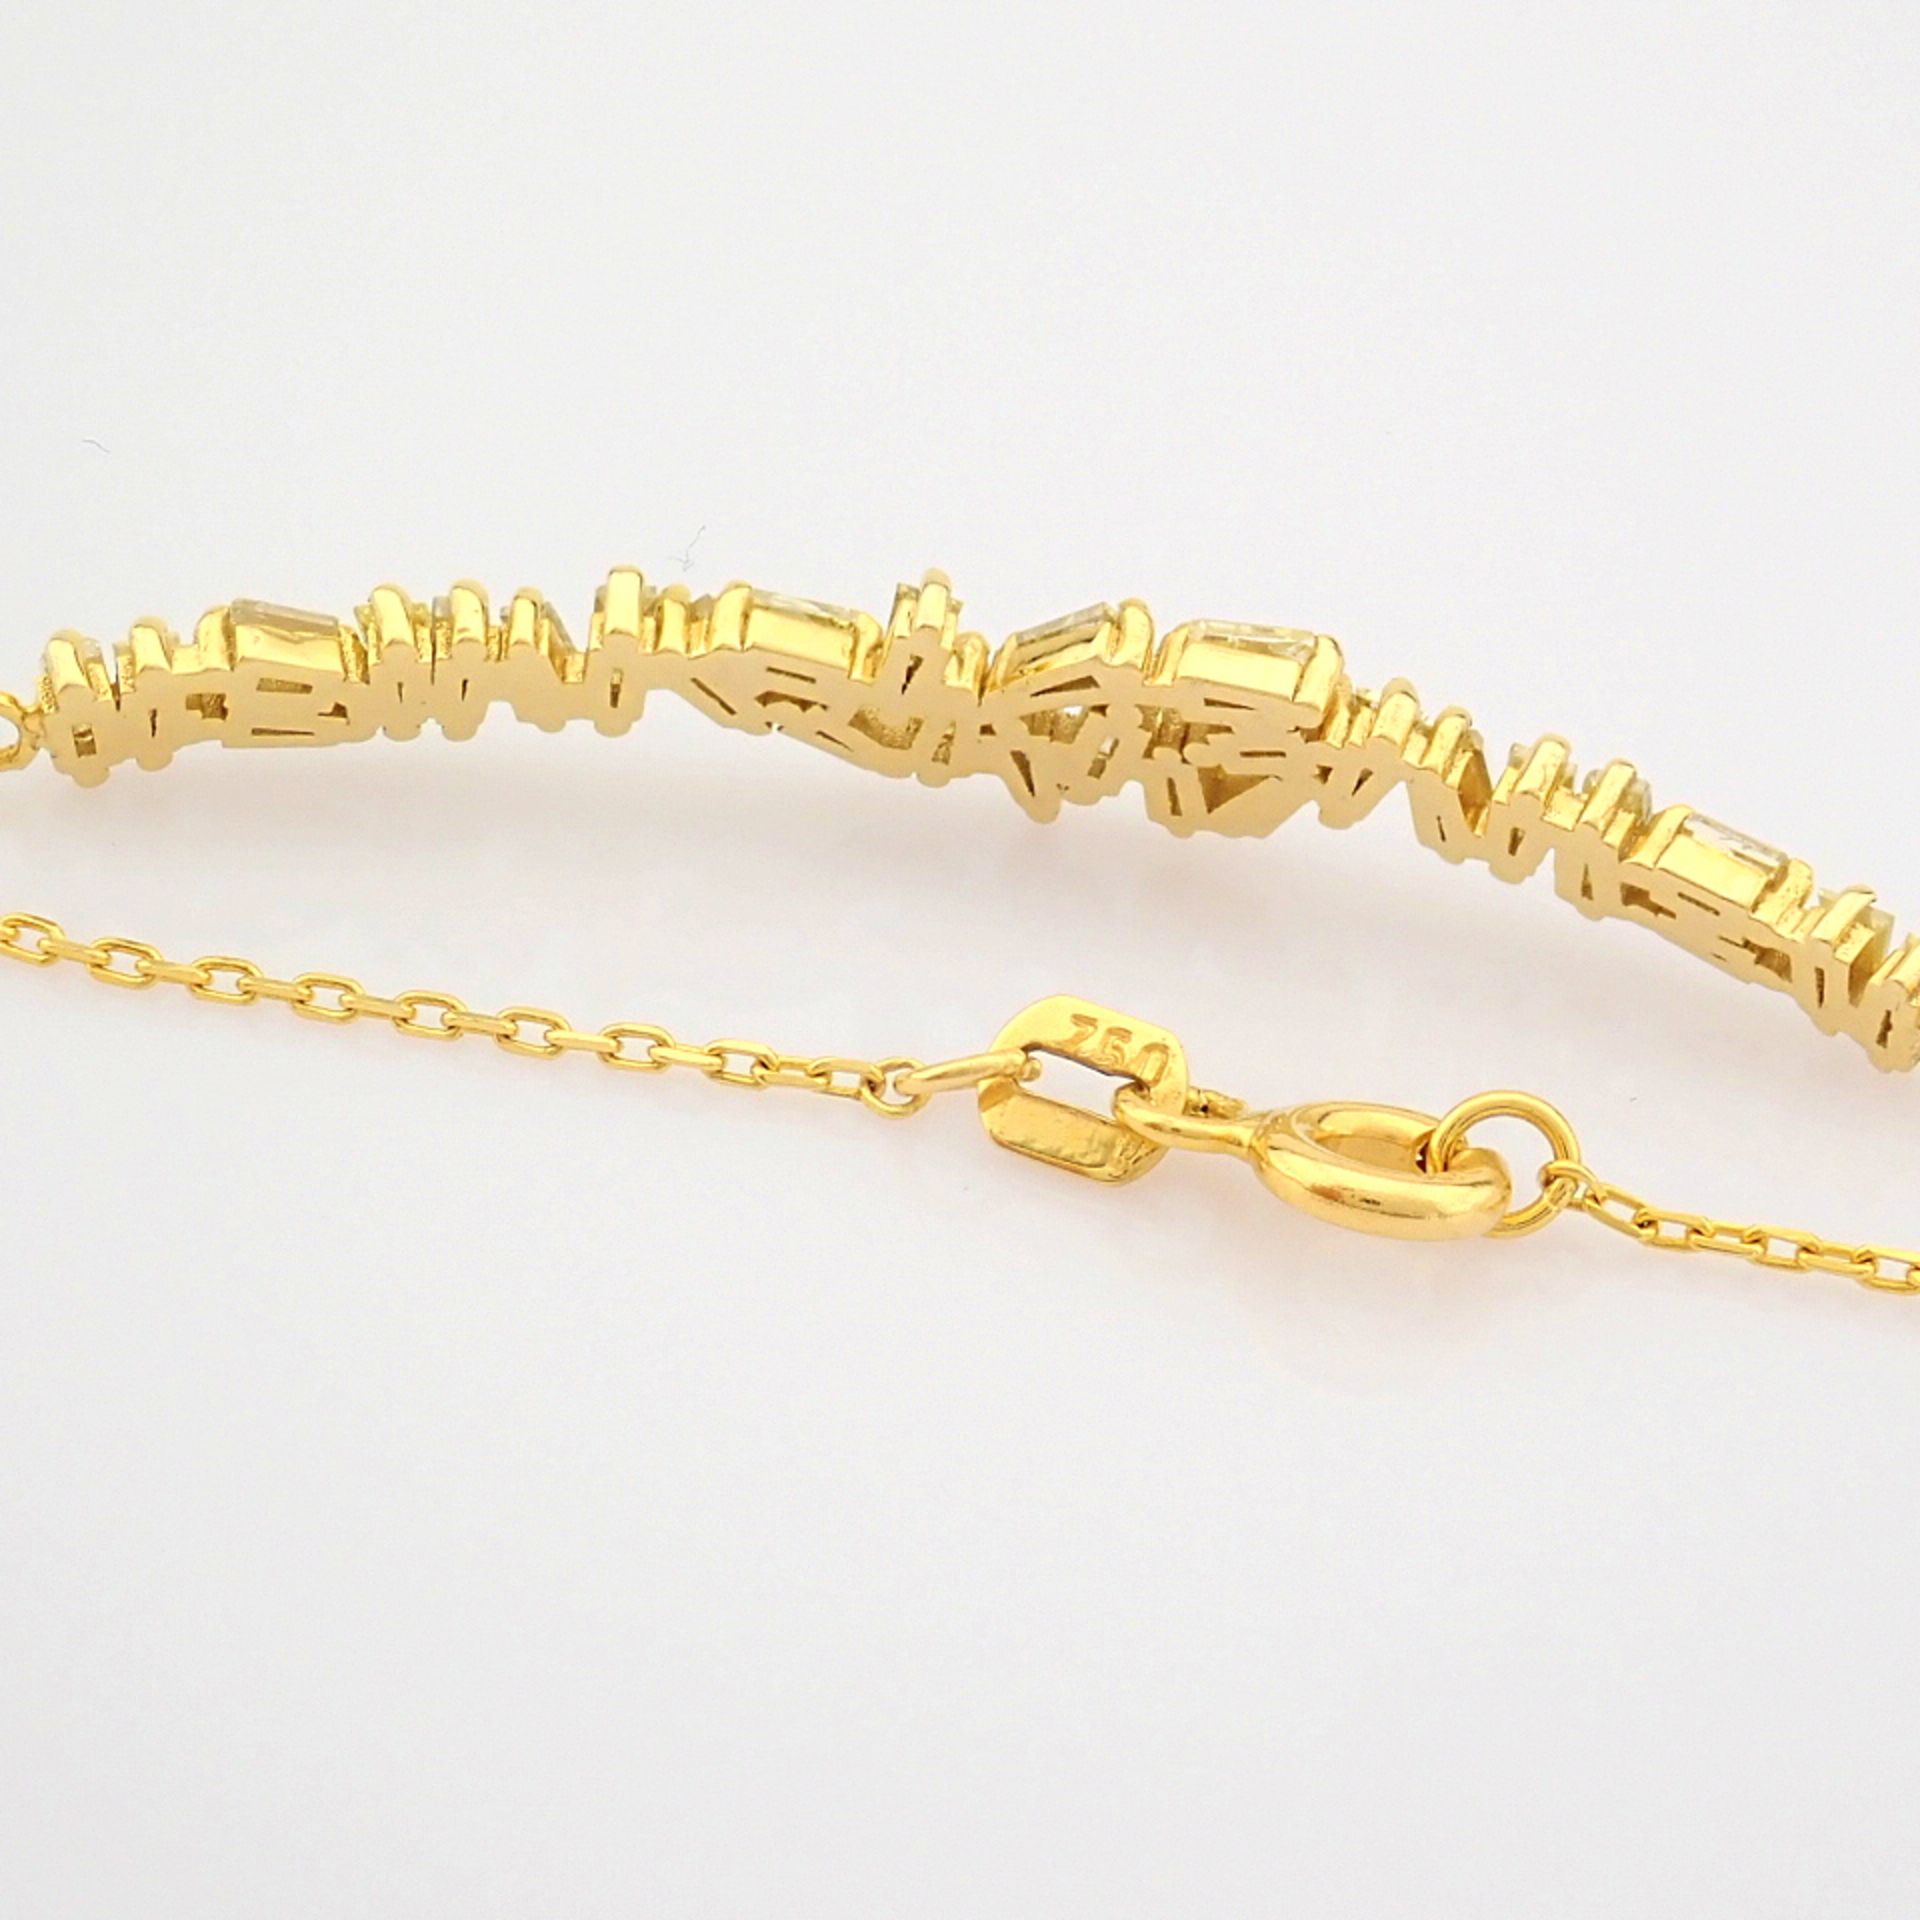 Certificated 14K Yellow Gold Fancy Diamond Bracelet (Total 0.84 ct Stone) - Image 4 of 7